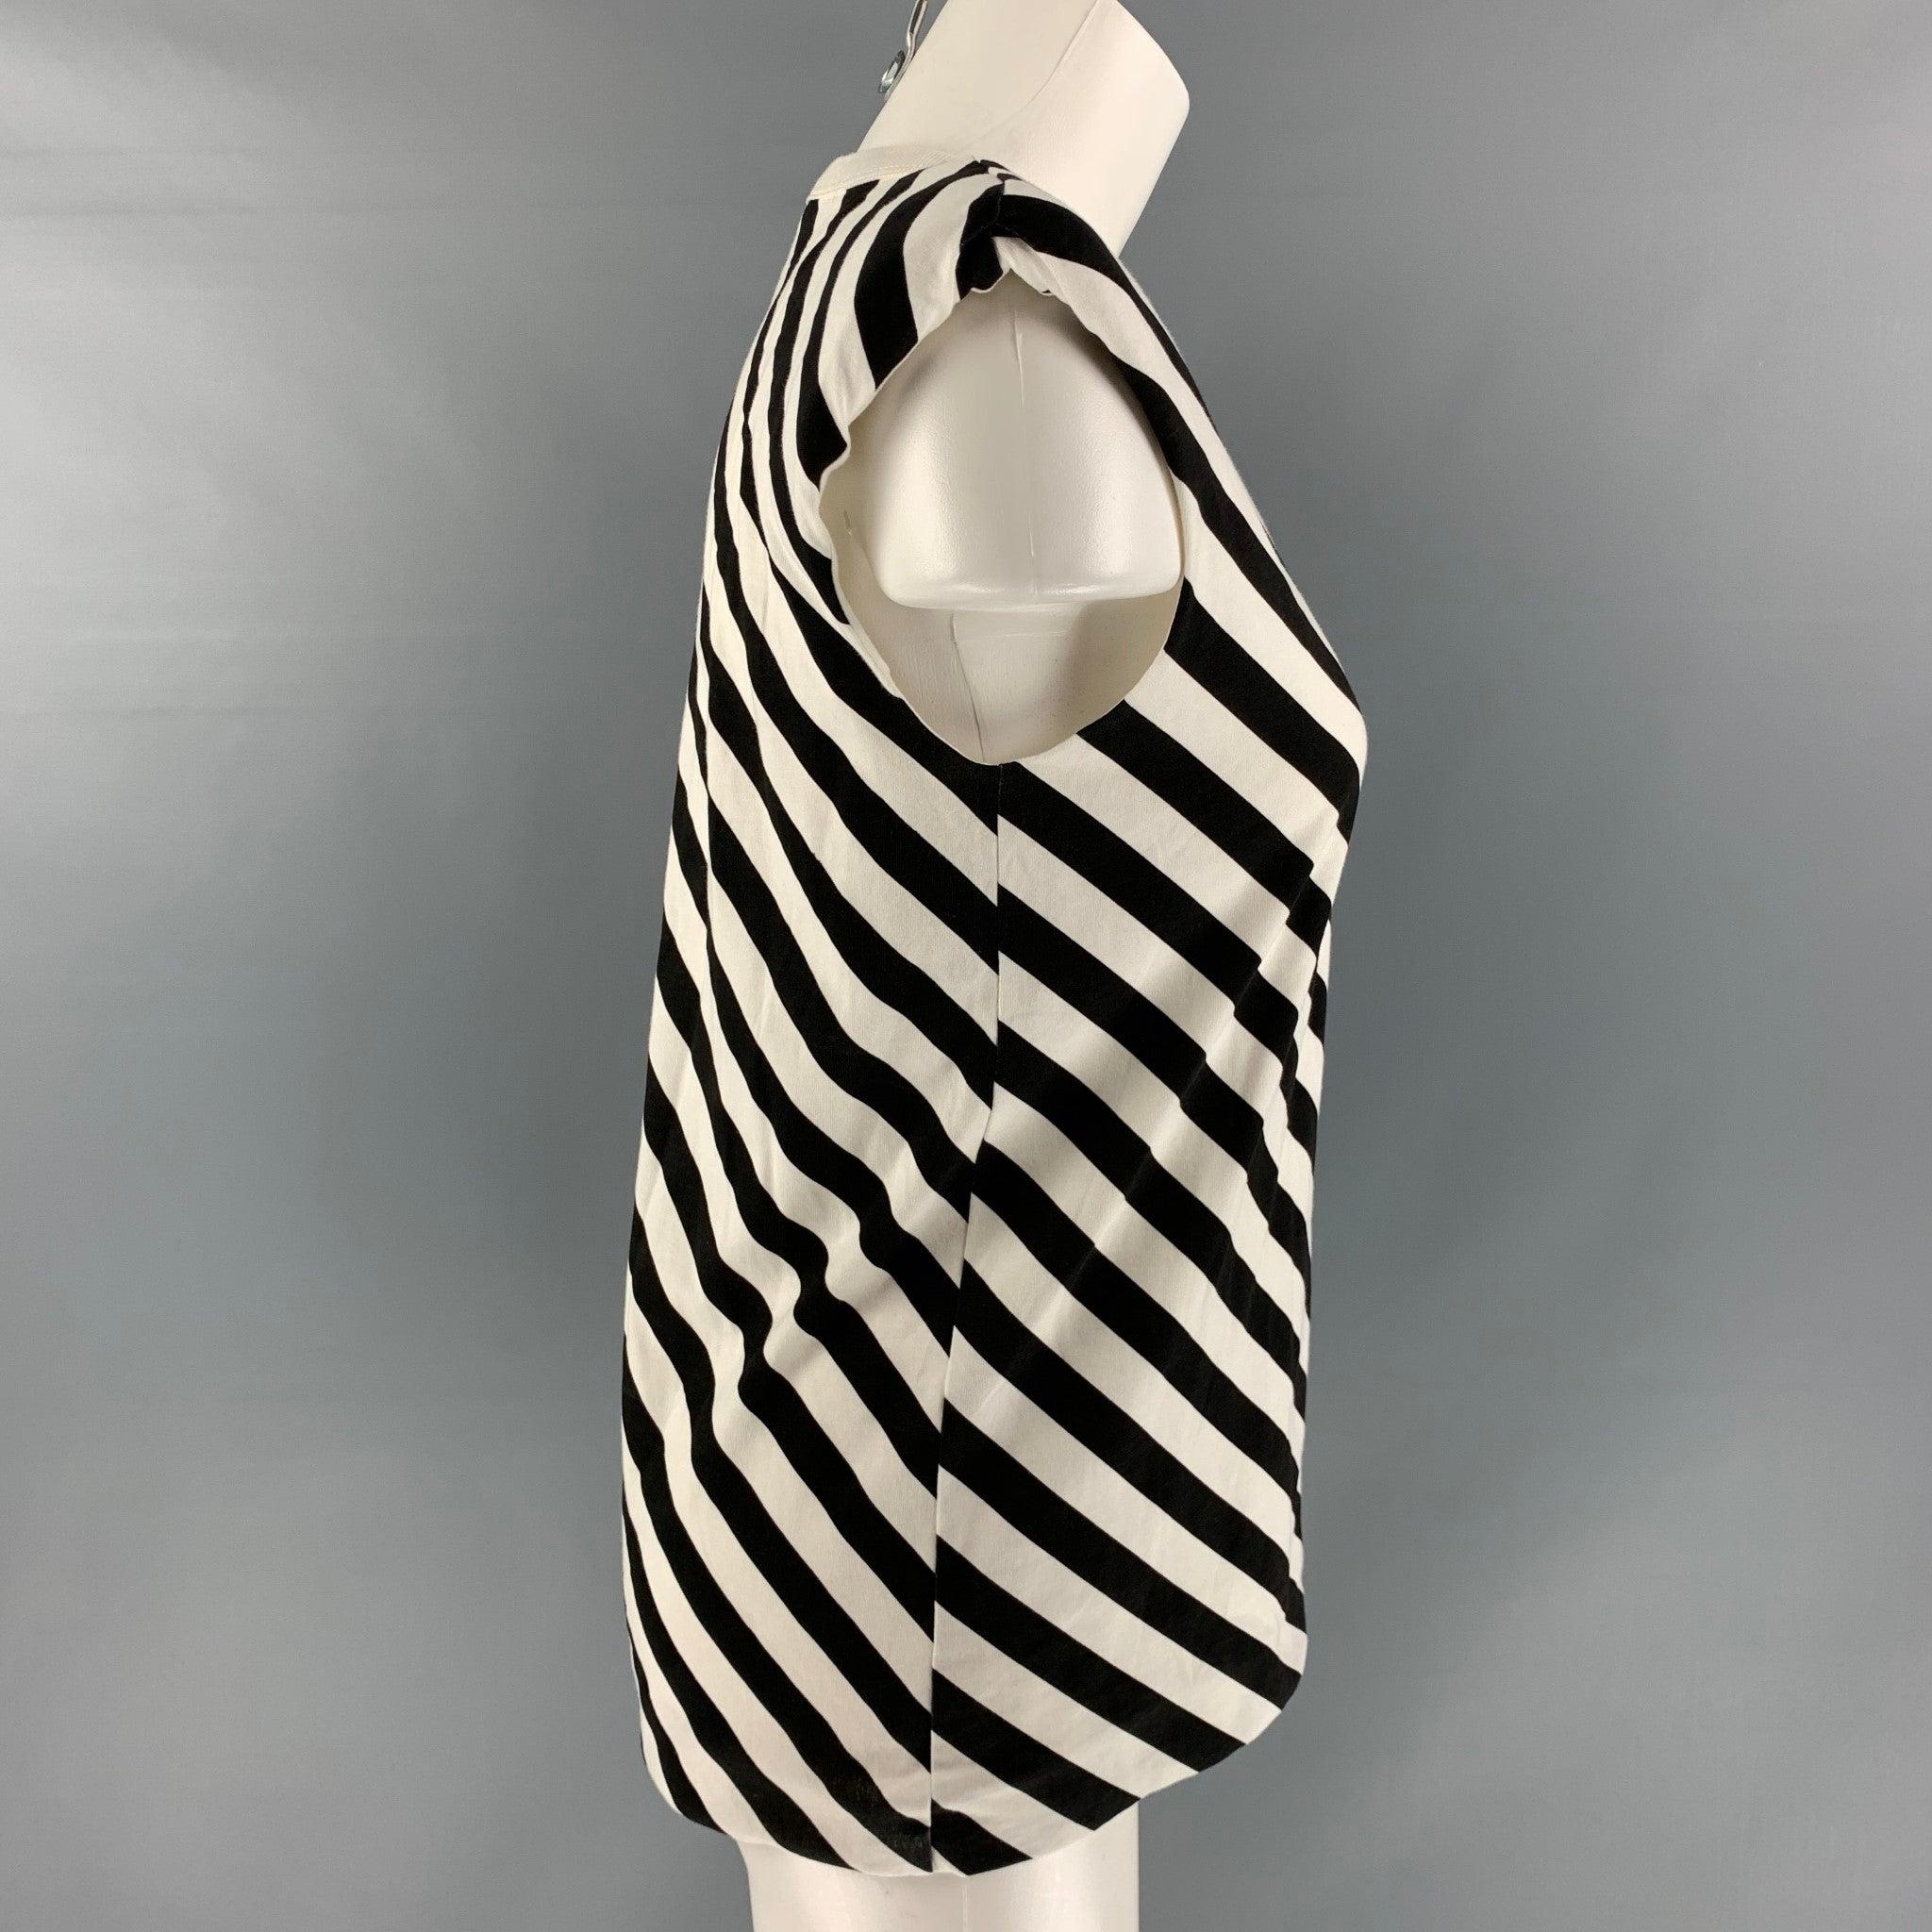 DRIES VAN Noten casual top comes in black and white stripped cotton jersey featuring shoulder pads and crew- neck.
 Excellent Pre-Owned Condition. 

Marked:   XS 

Measurements: 
 
Shoulder: 16 inches 
Bust: 36 inches 
Length: 24 inches  

  
  
